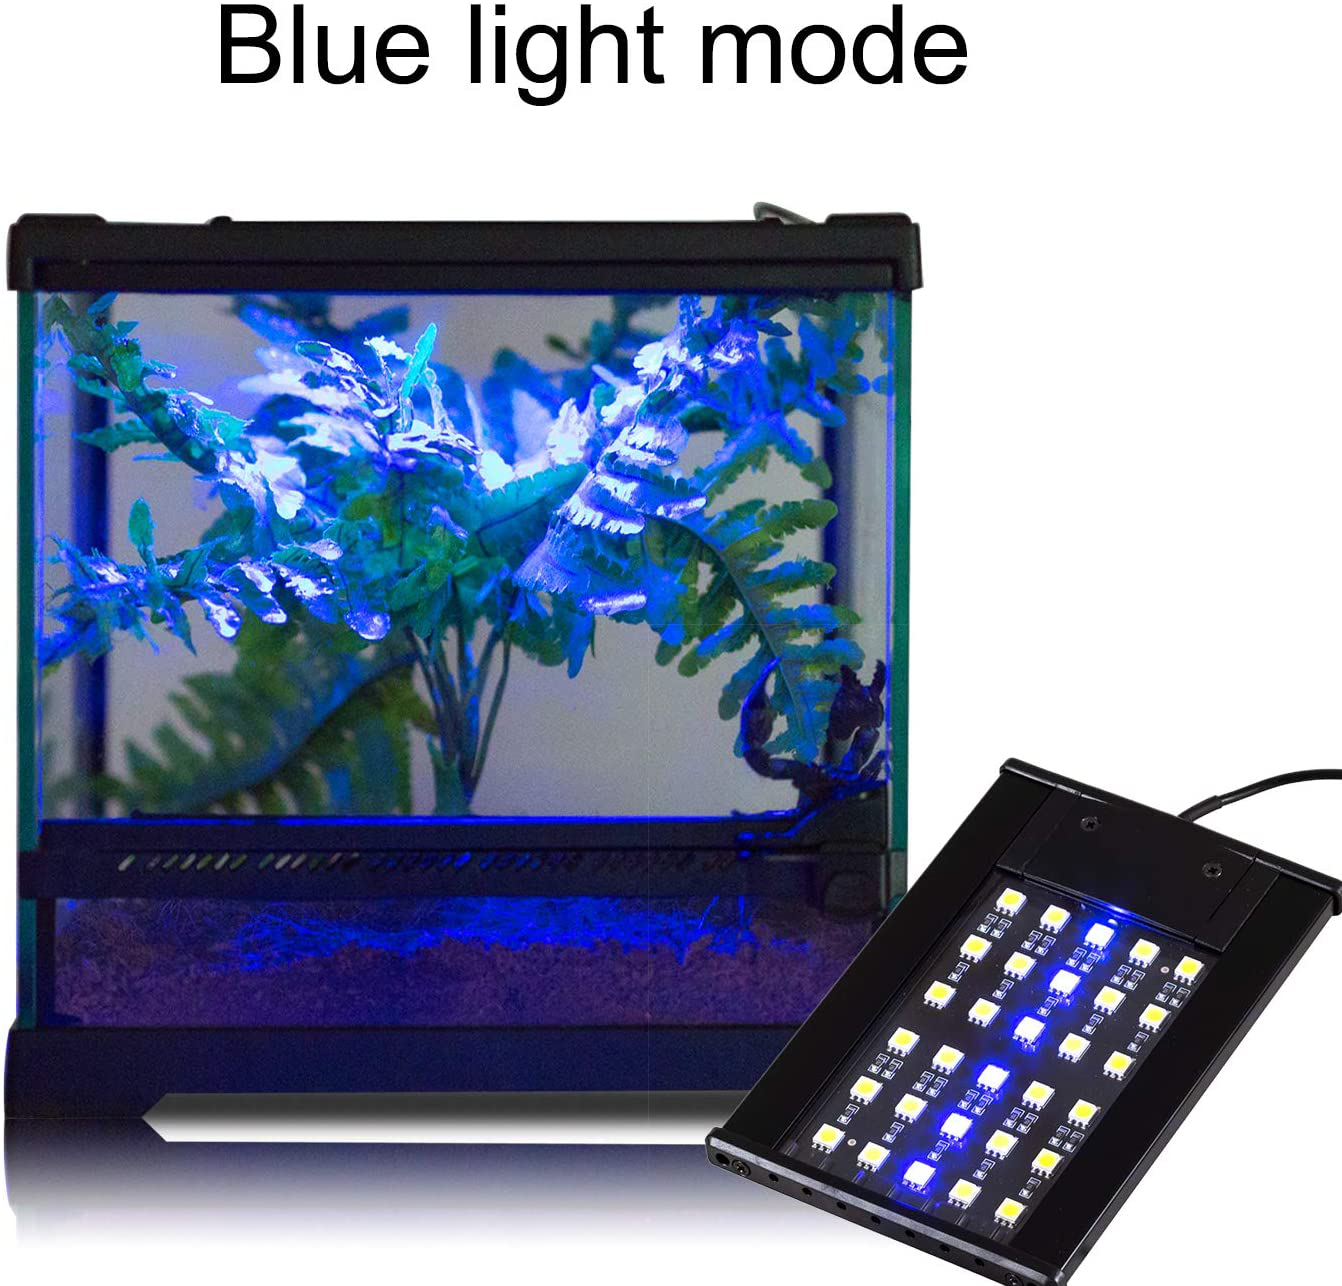 REPTI ZOO Terrarium Light Day and Night Mode Reptile LED Light Hood for Reptile Terrarium White Light and Blue Light Fit for Different Pet Habits